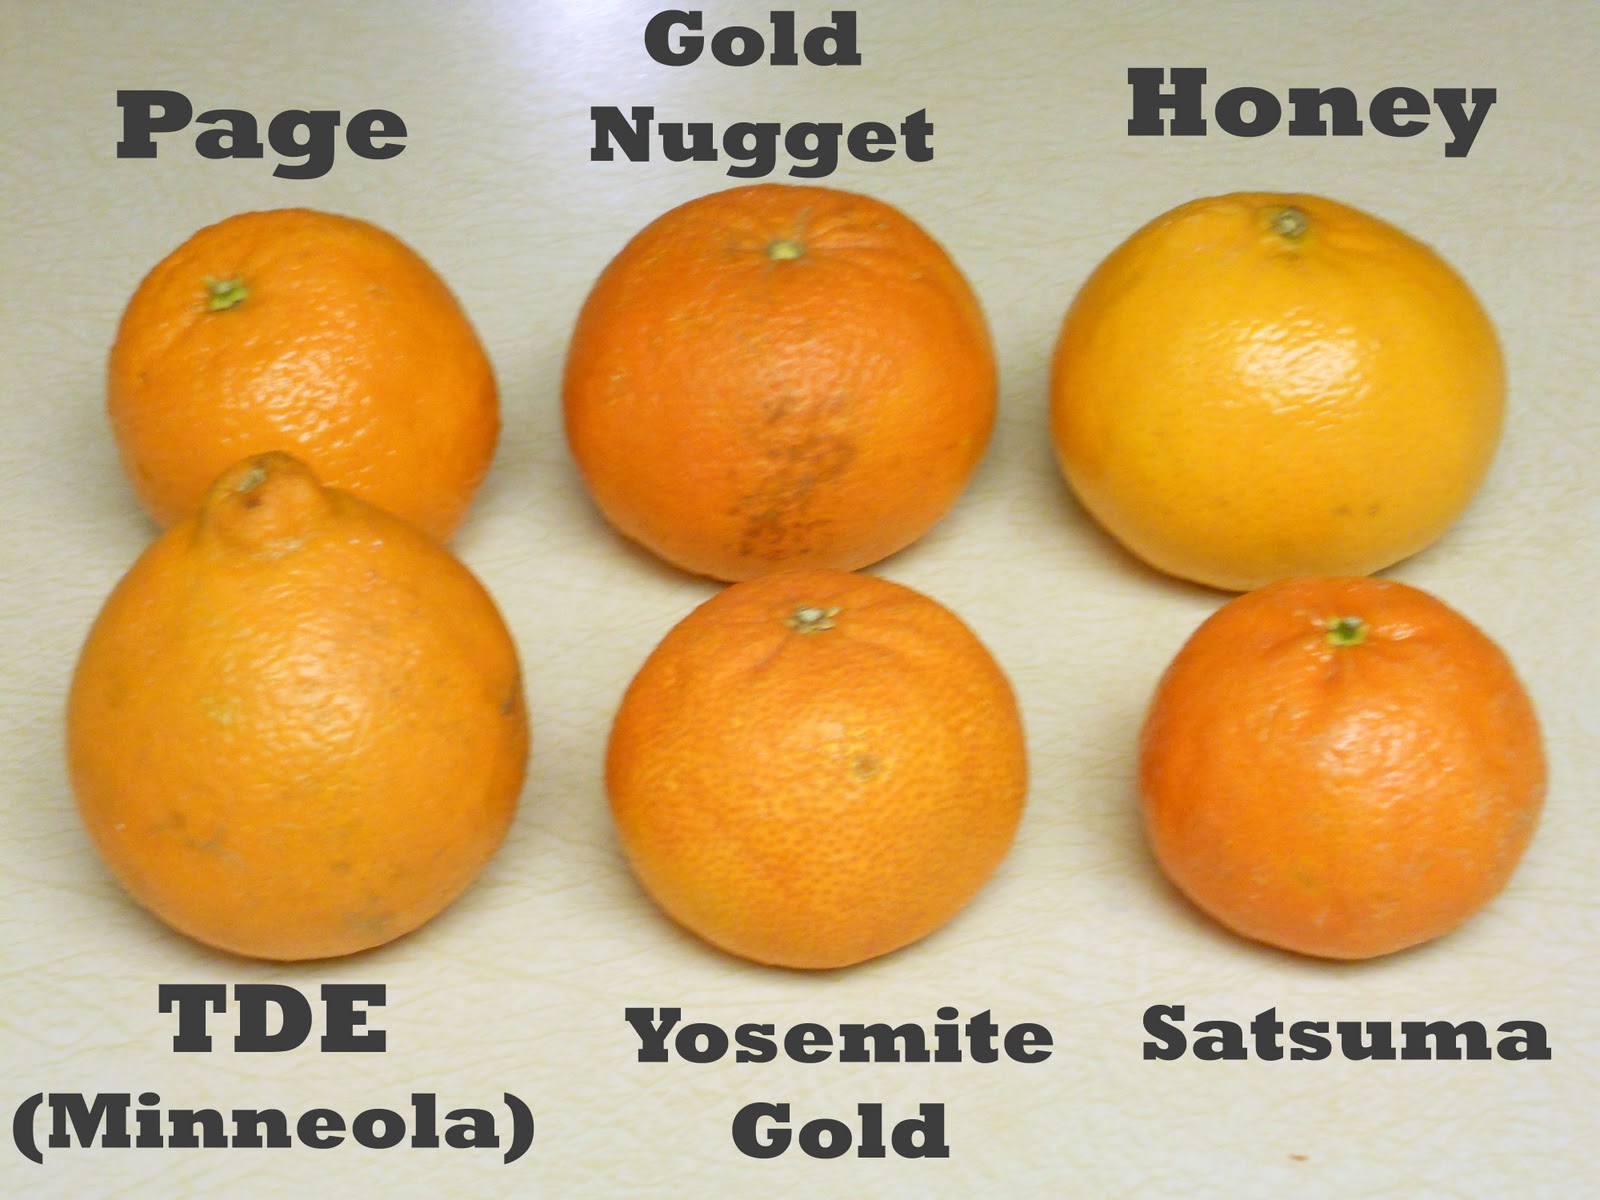 Tangerines vs Oranges: How Are They Different?